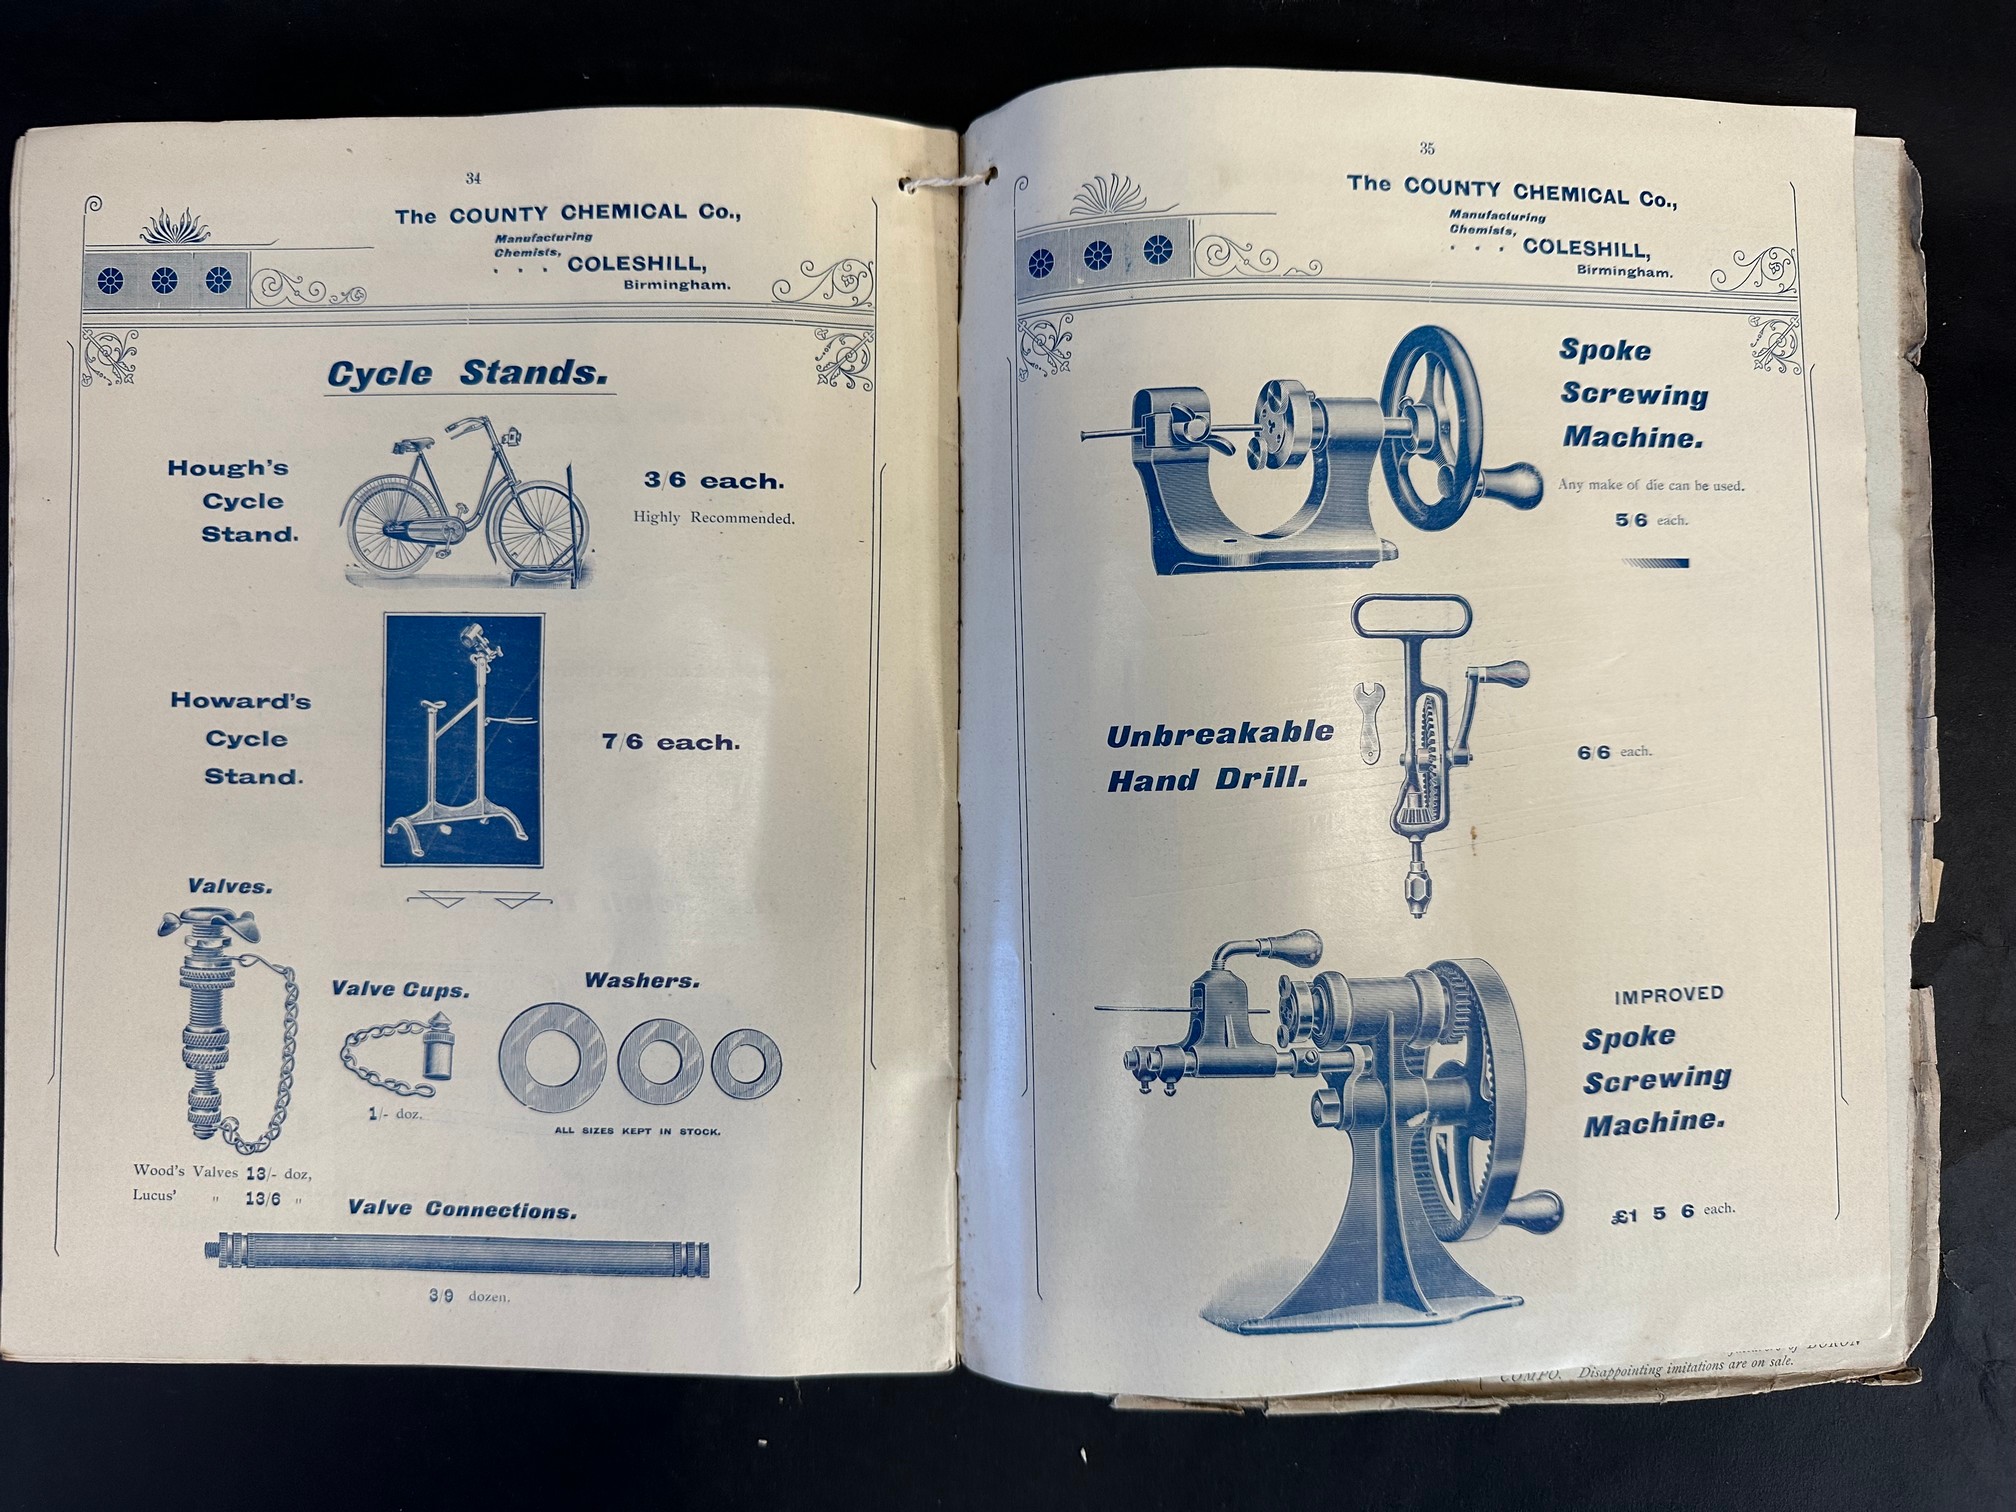 A rare 1898 revised price list for The County Chemical Co Cycle Season, fully illustrated throughout - Image 8 of 9